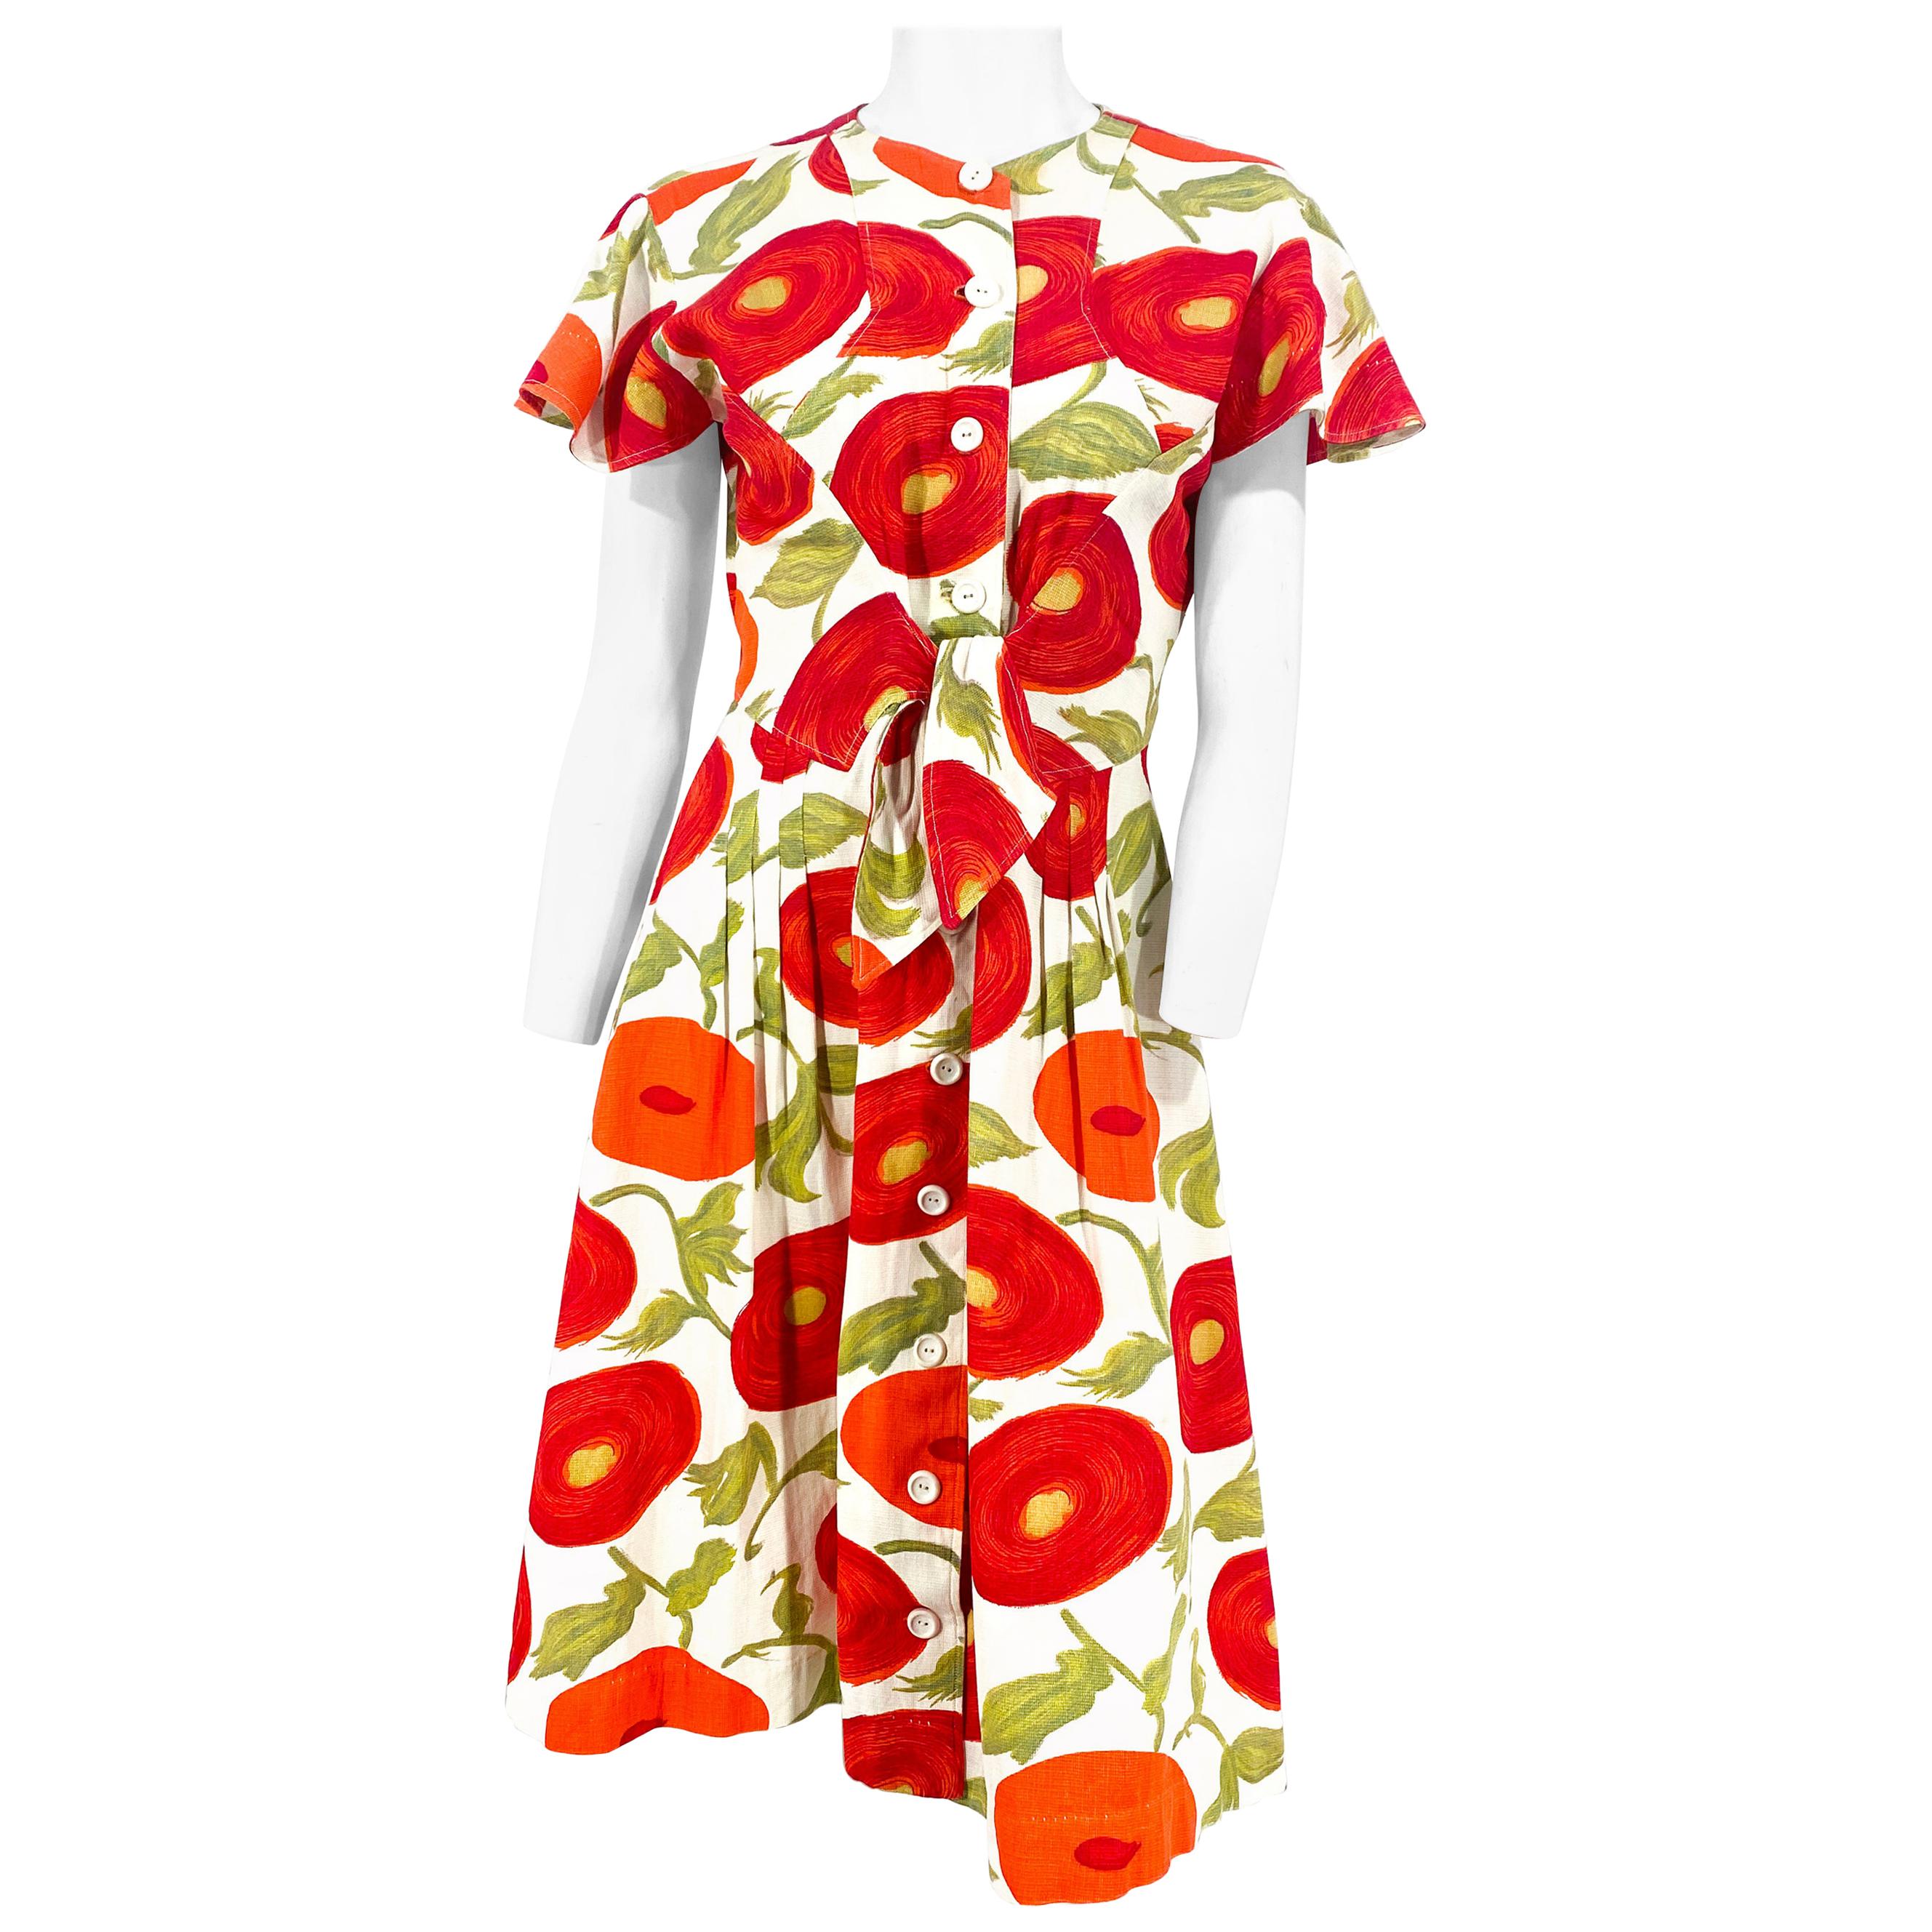 1950s Surreal Printed Pique Day Dress